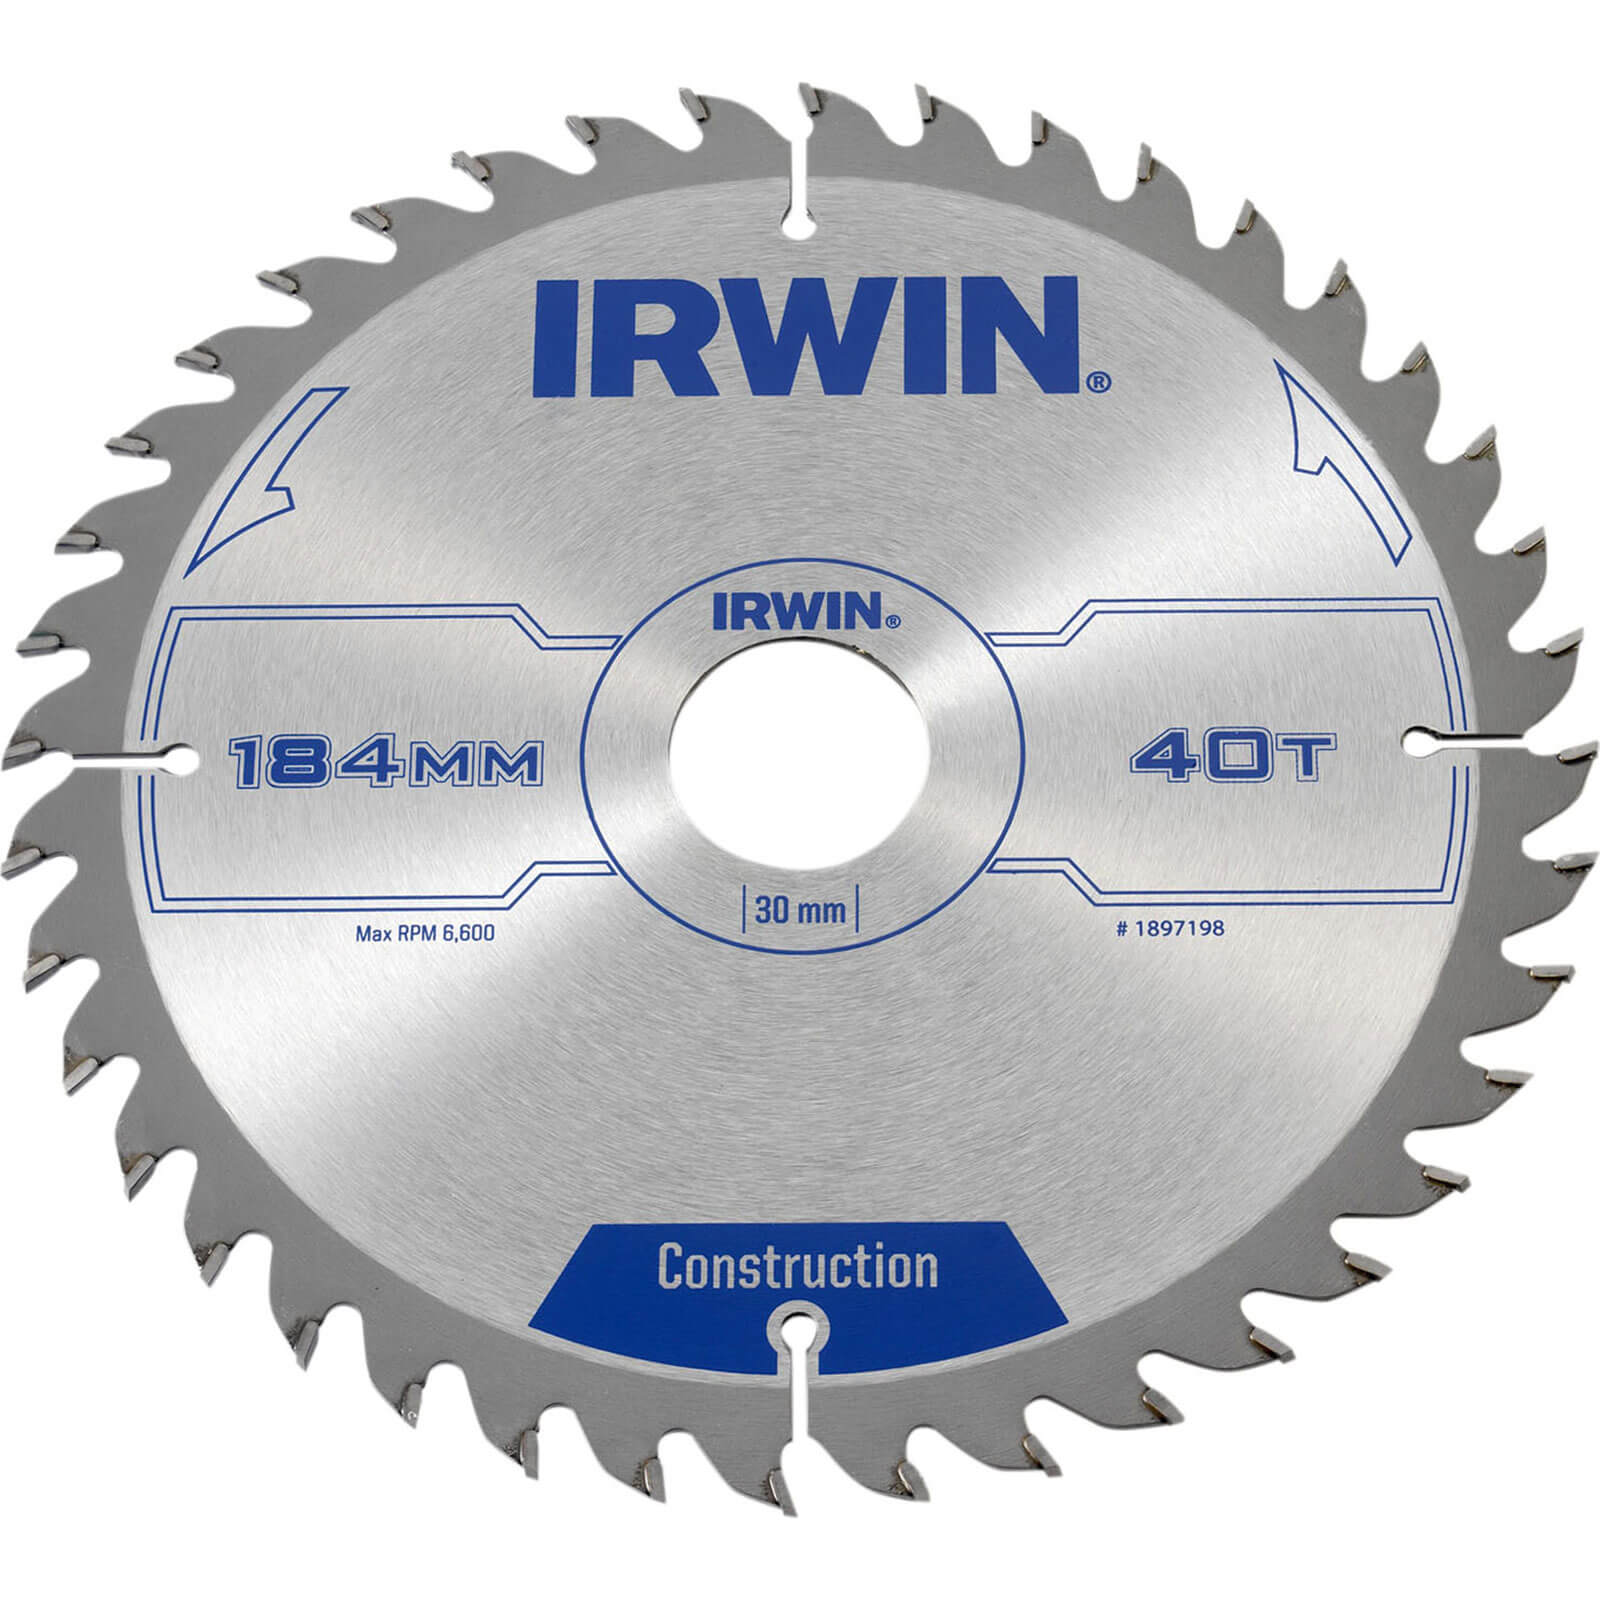 Photo of Irwin Atb Construction Circular Saw Blade 184mm 40t 30mm